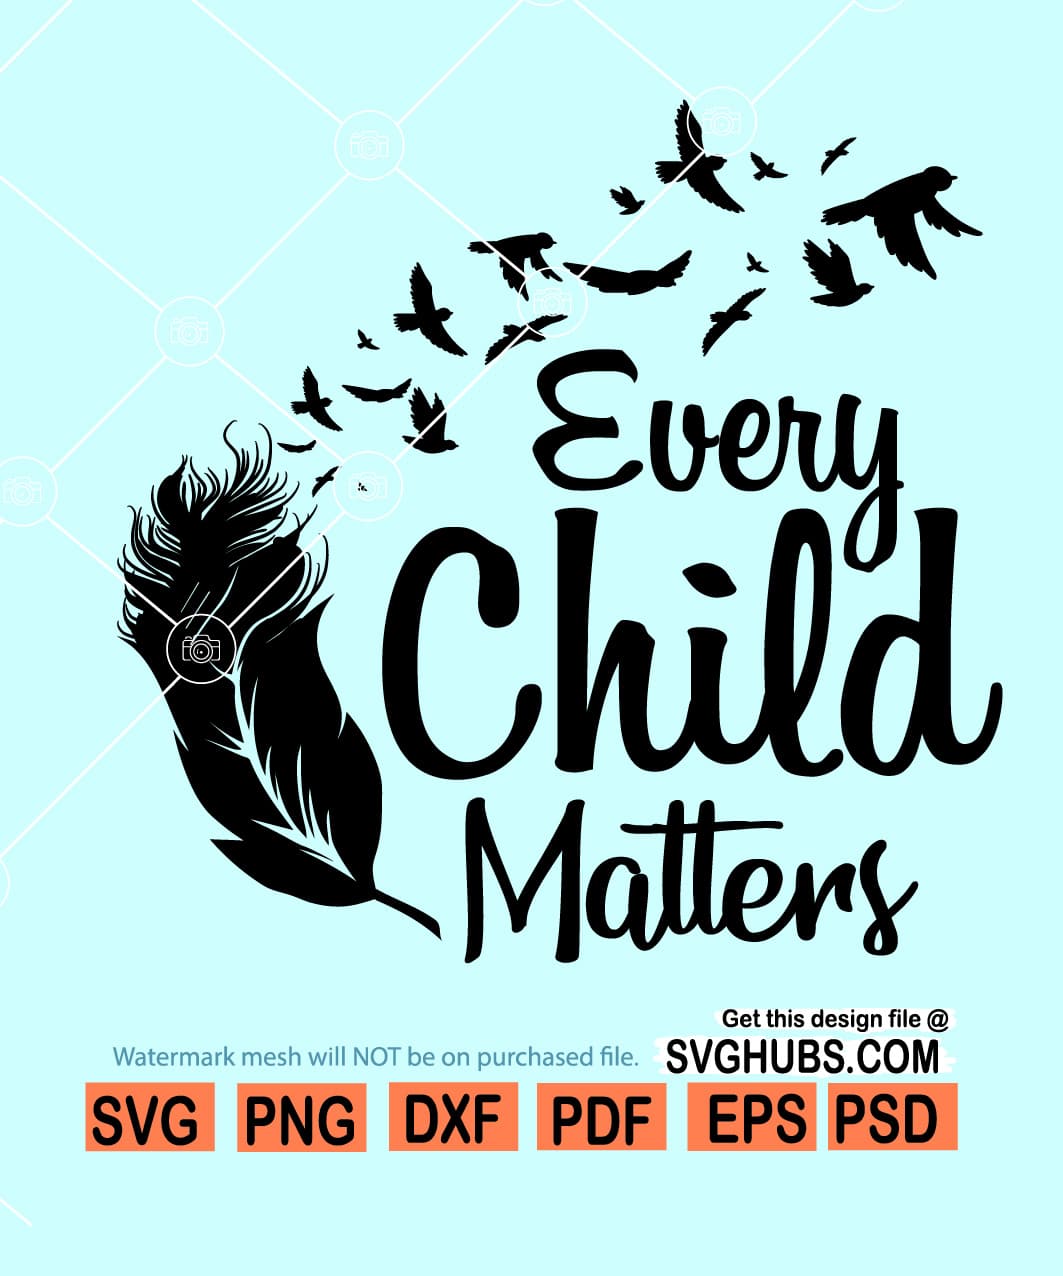 Every child matters png